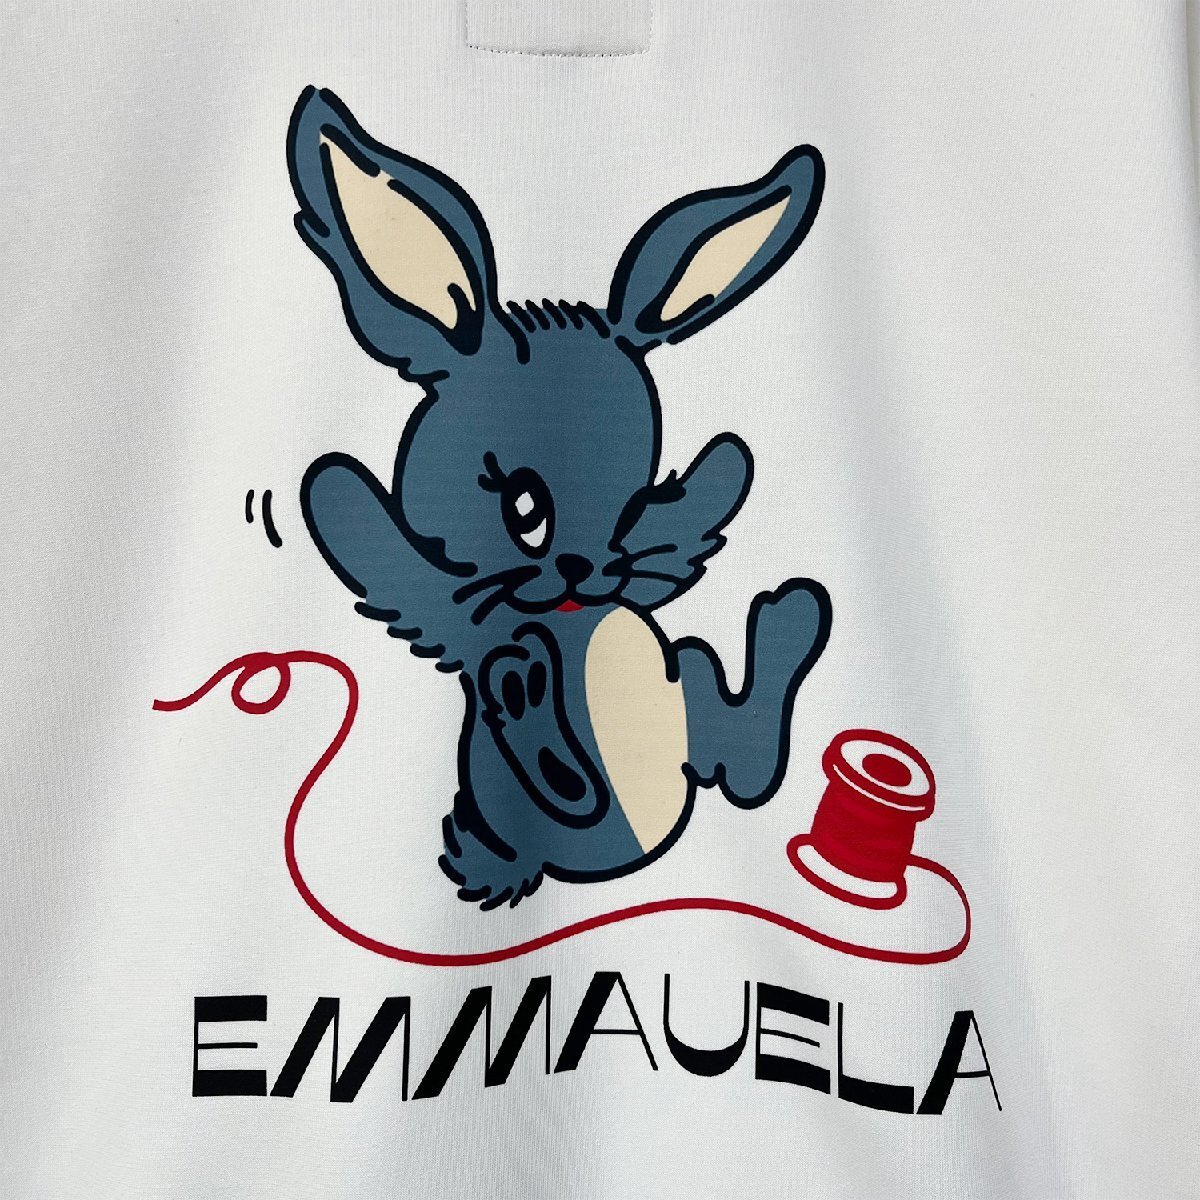  high class * sweatshirt regular price 4 ten thousand *Emmauela* Italy * milano departure * cotton 100% comfortable pull over rabbit pretty playing heart man and woman use M/46 size 